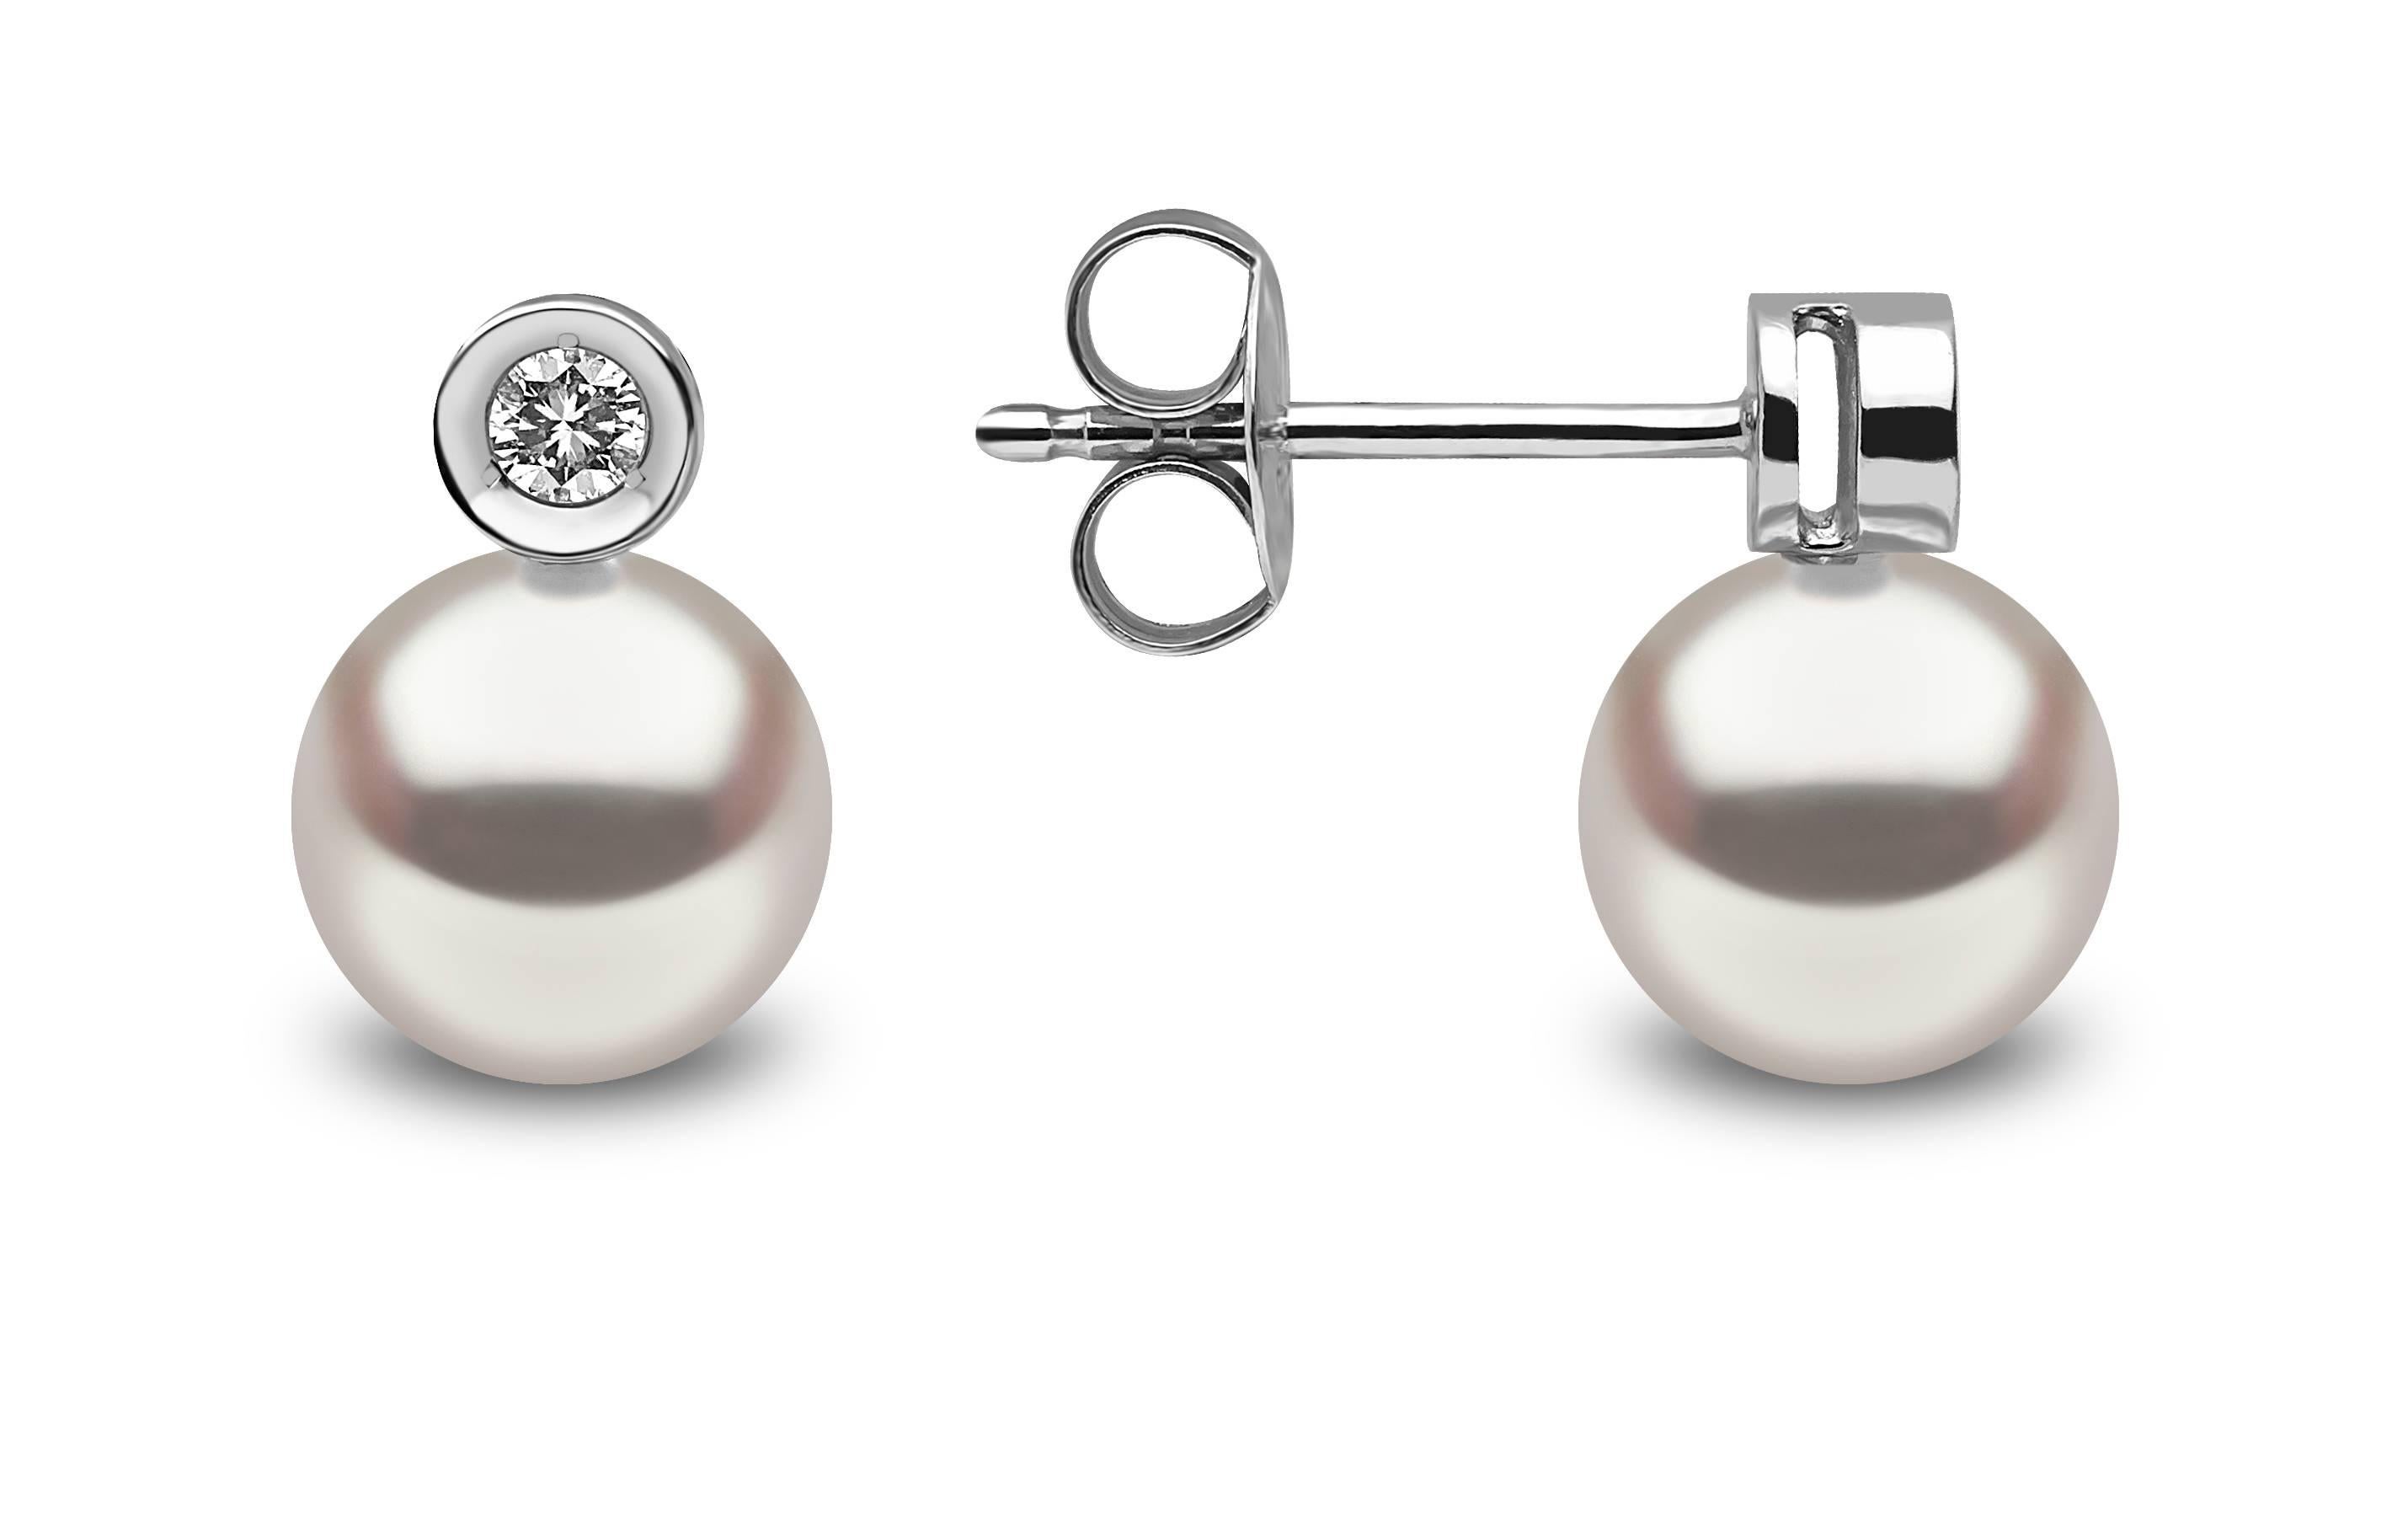 The chic combination of white diamonds and 18k white gold is re-imagined with two bold Cultured pearls in these exquisite earrings from Yoko London. 

- 18k White Gold
- 2 Diamonds 0.10cts
- 8mm Cultured Pearl

